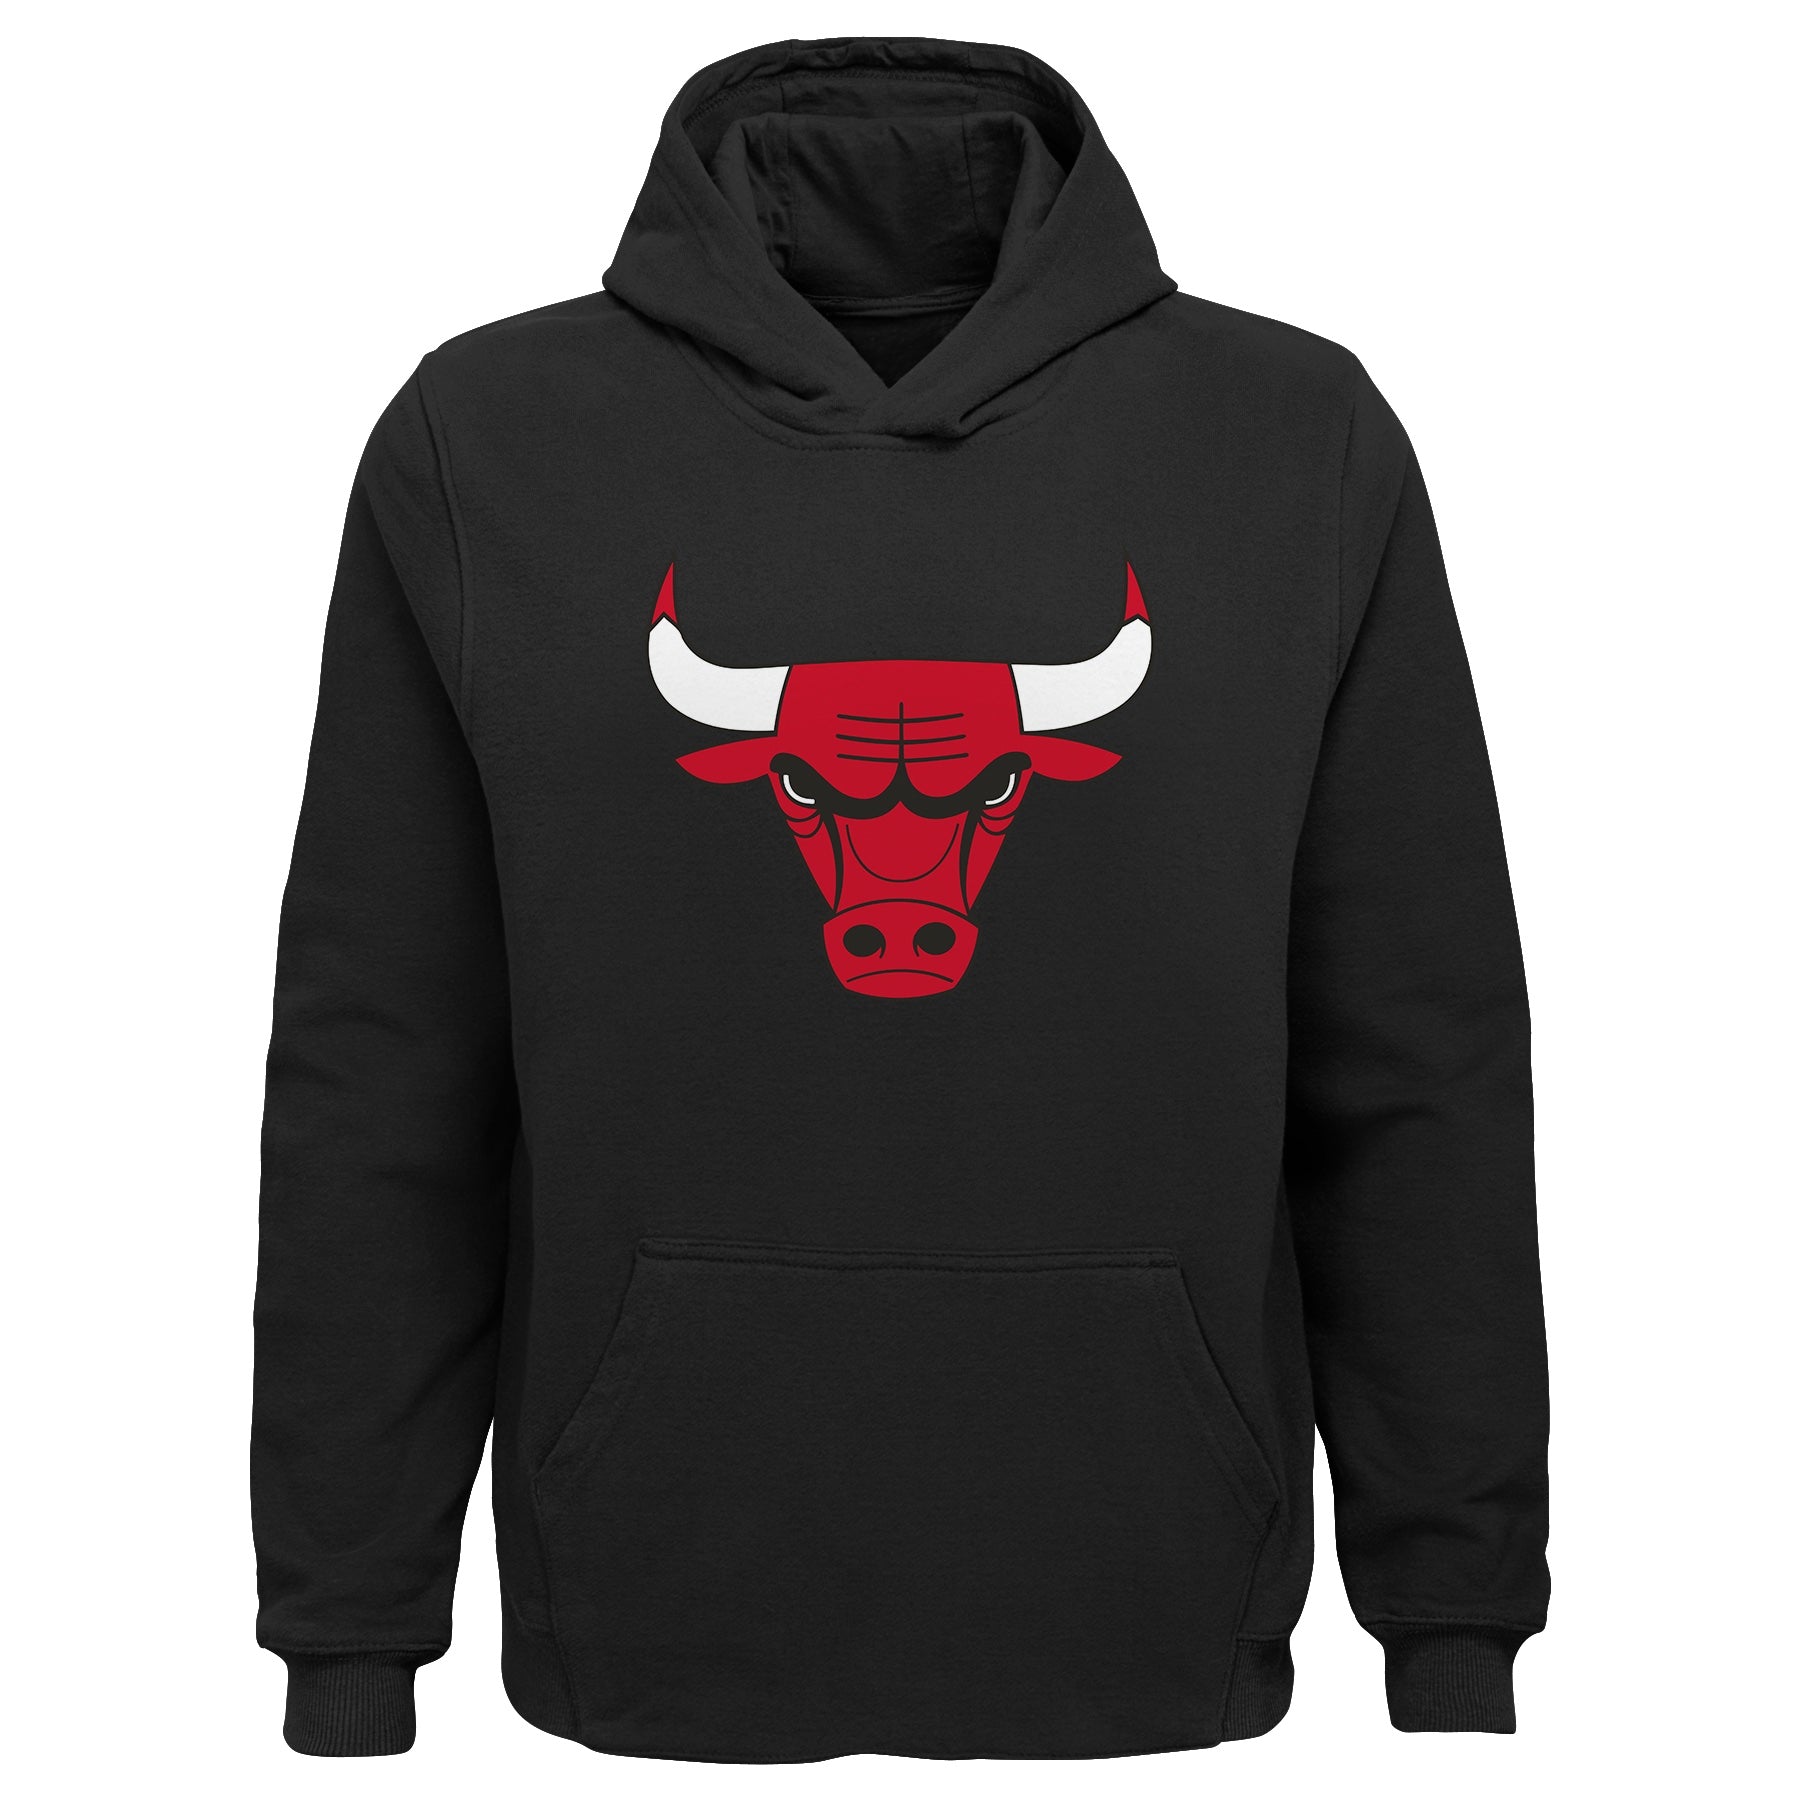 Chicago Bulls Youth Color Blocked T-Shirt X-Large = 18-20